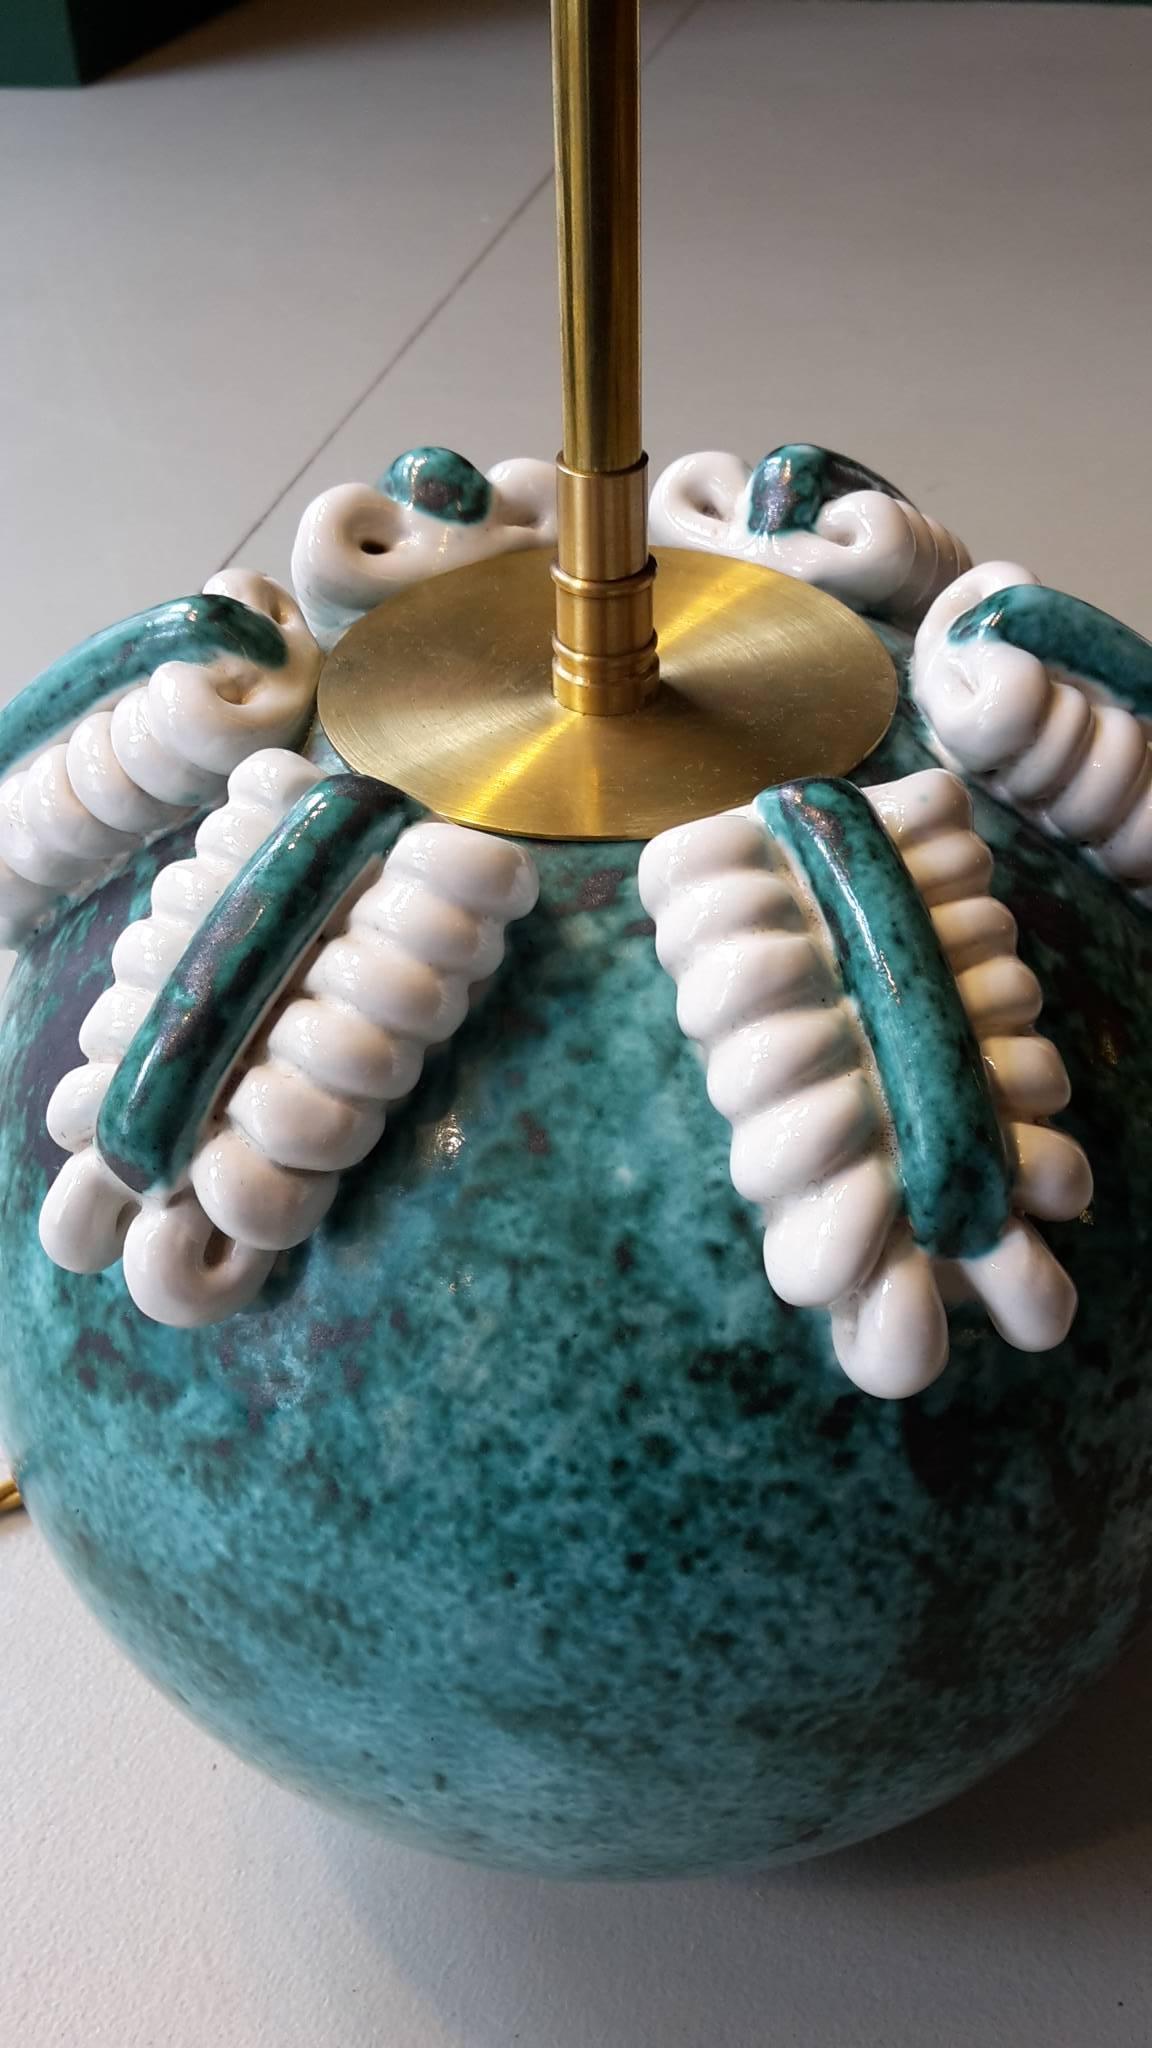 French Early 20th Century Art Deco Table Lamp Made of Turquoise and White Ceramic For Sale